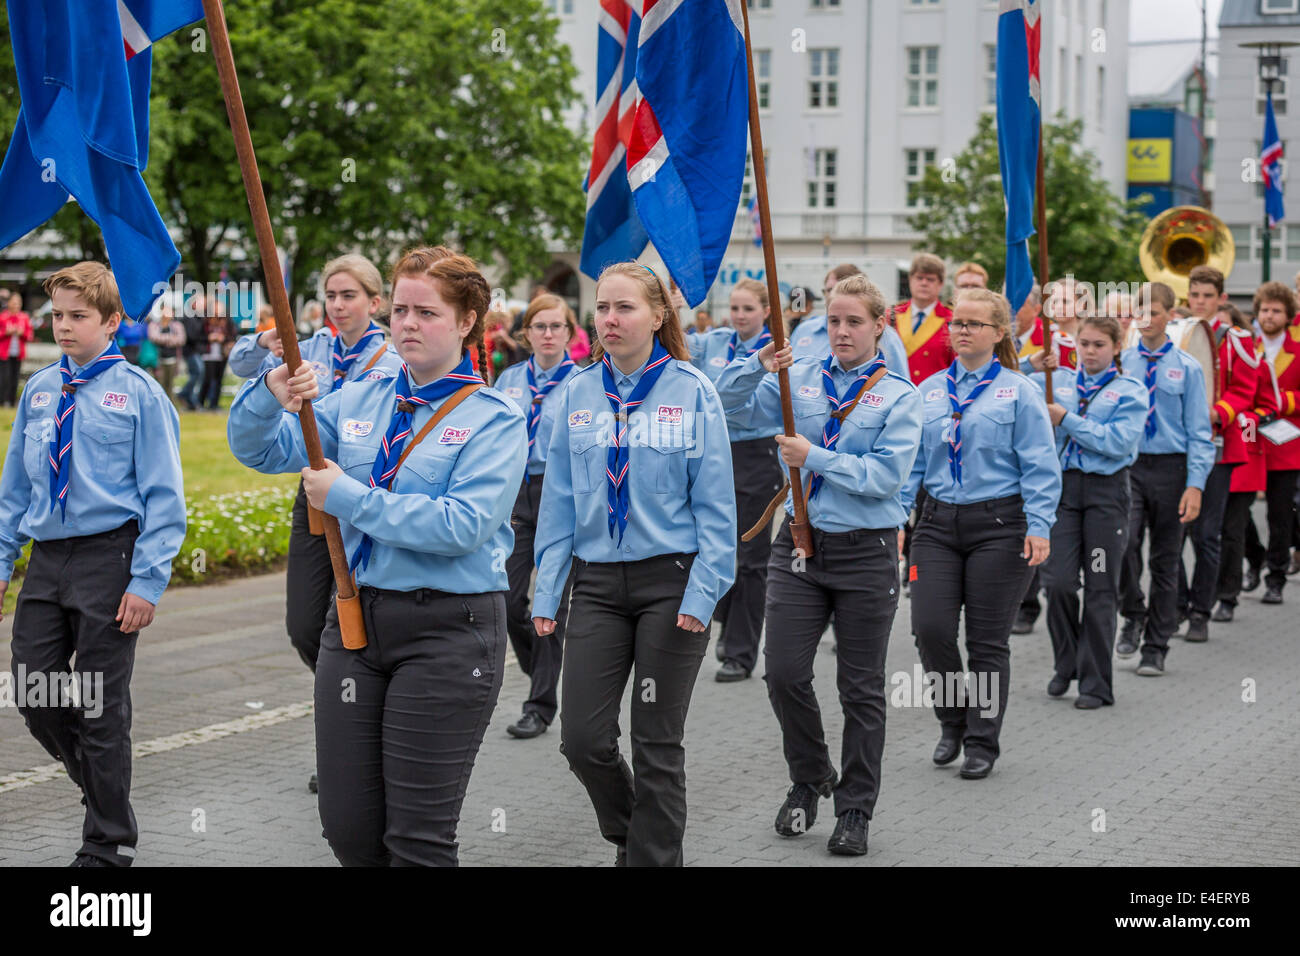 Scouts parading with Icelandic Flags. June 17th-Iceland's Independence Day, Reykjavik, Iceland Stock Photo